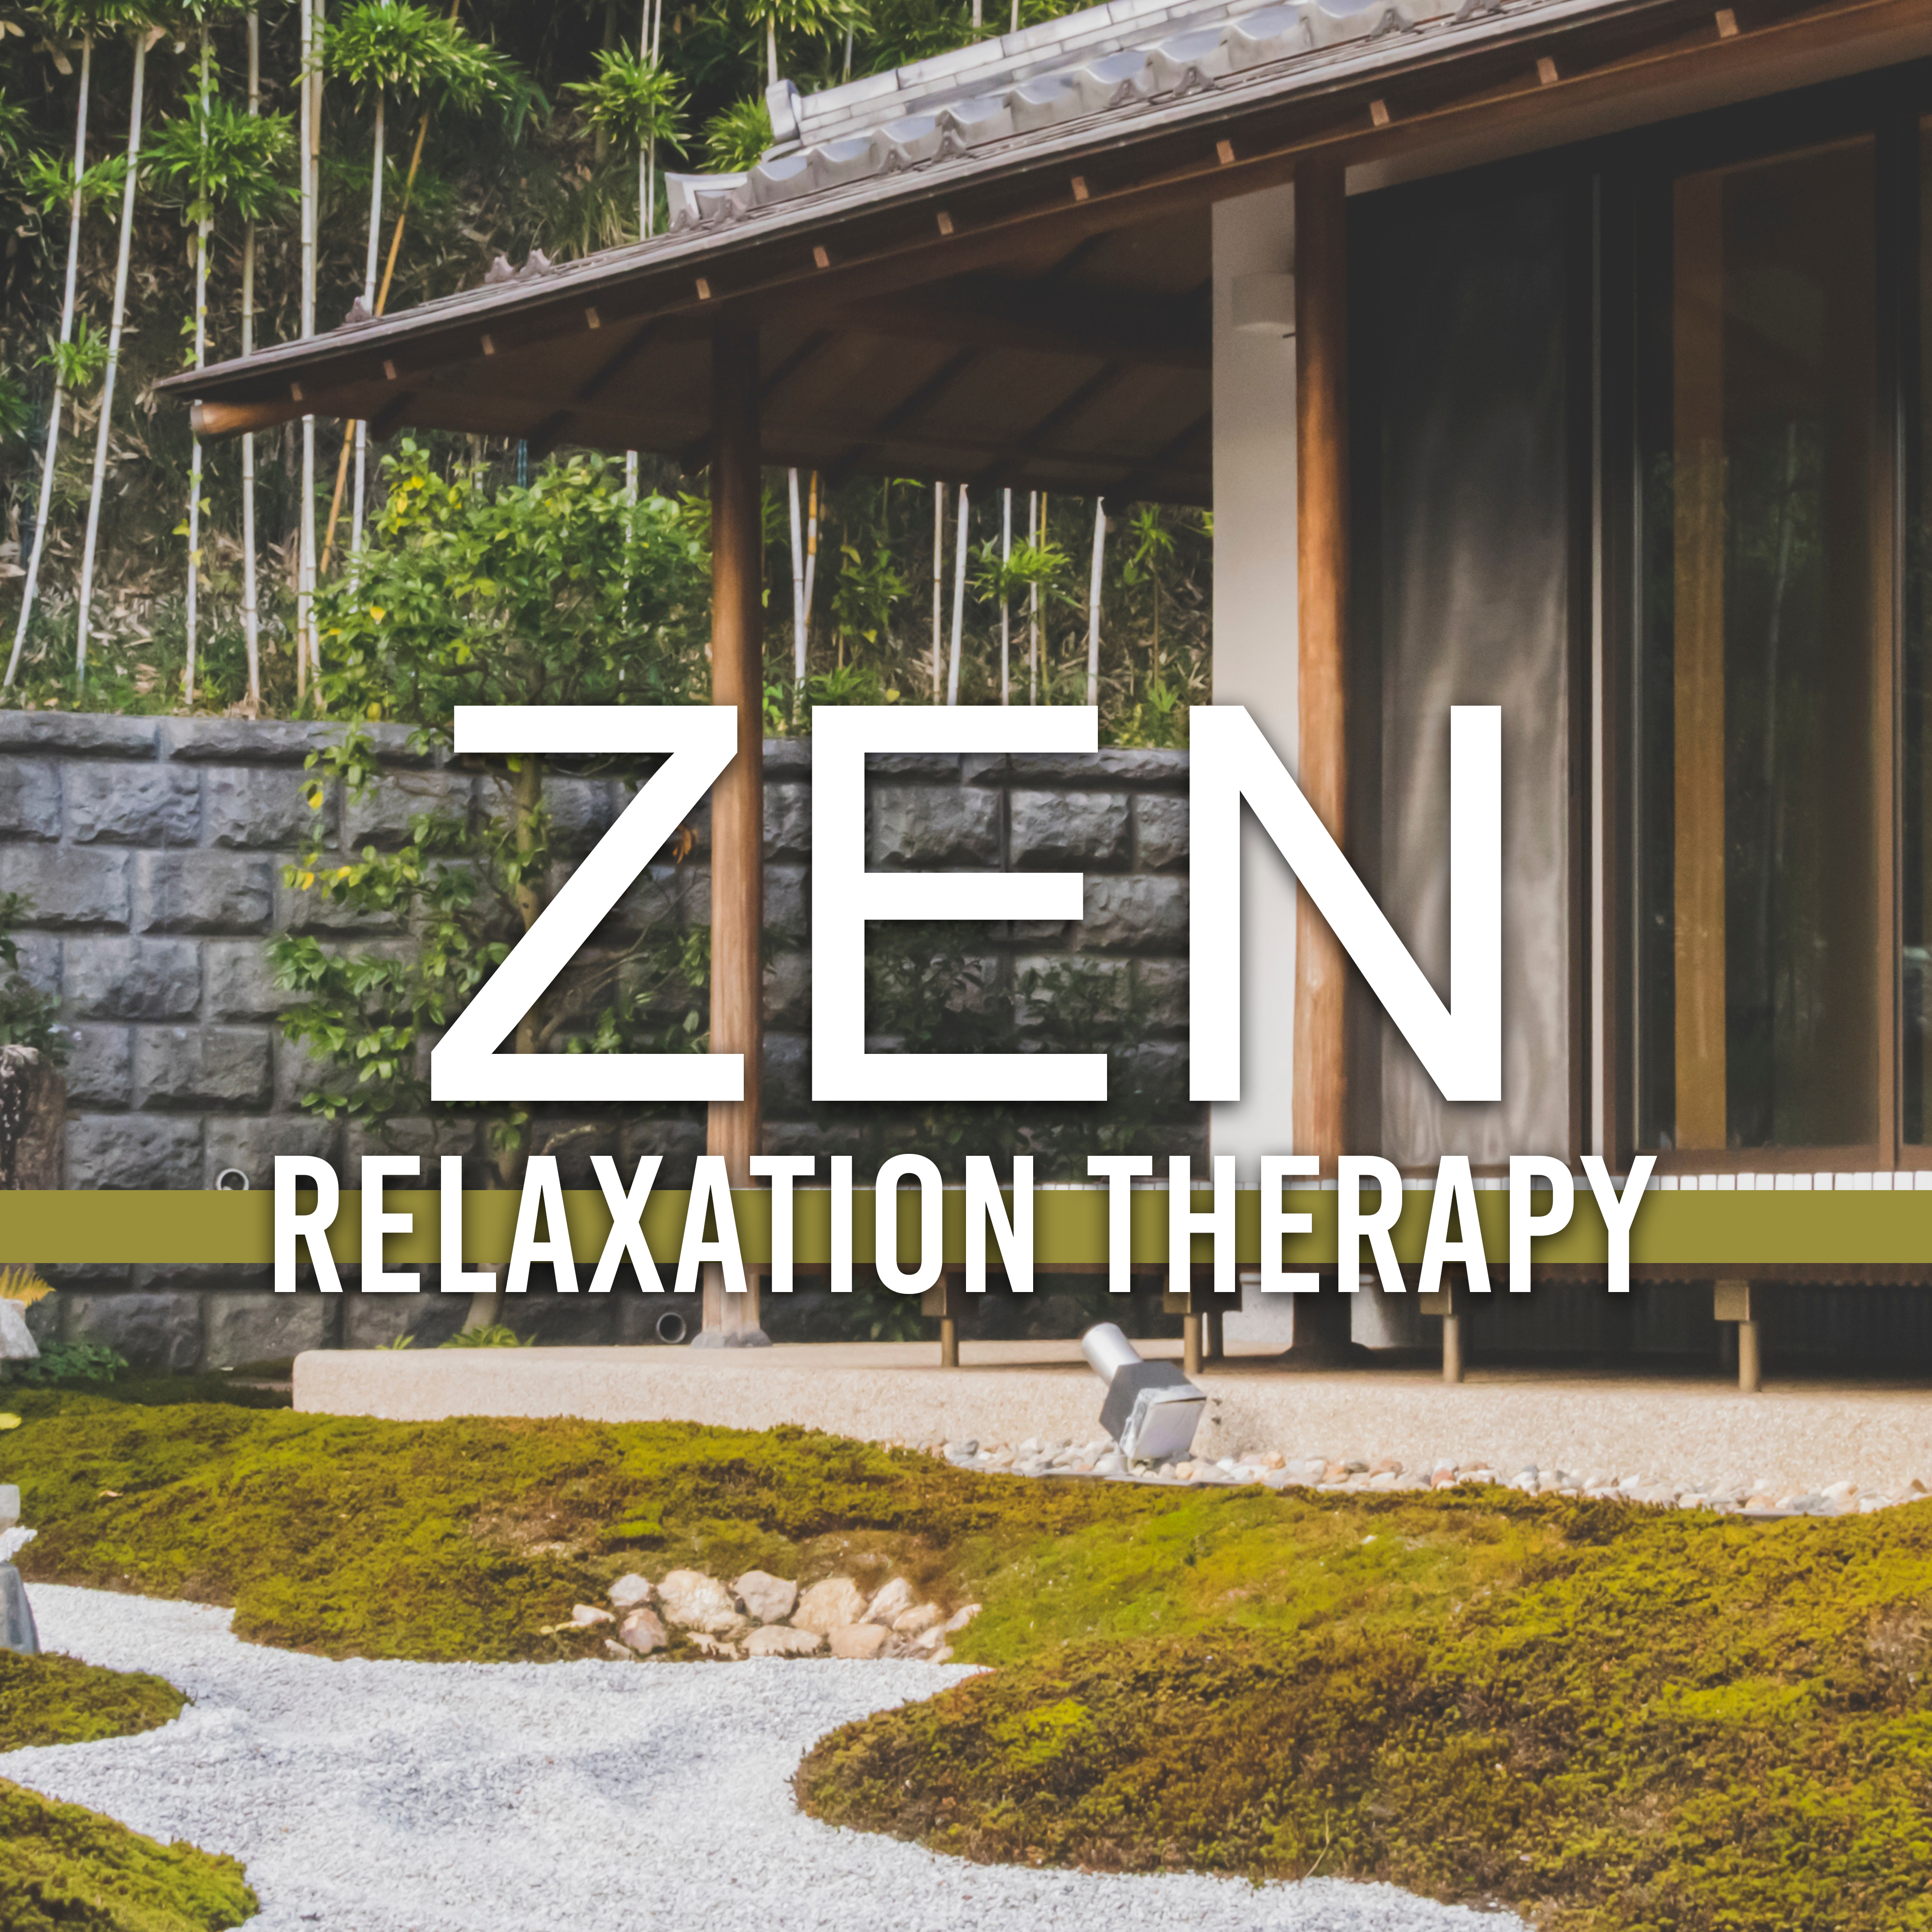 Zen Relaxation Therapy